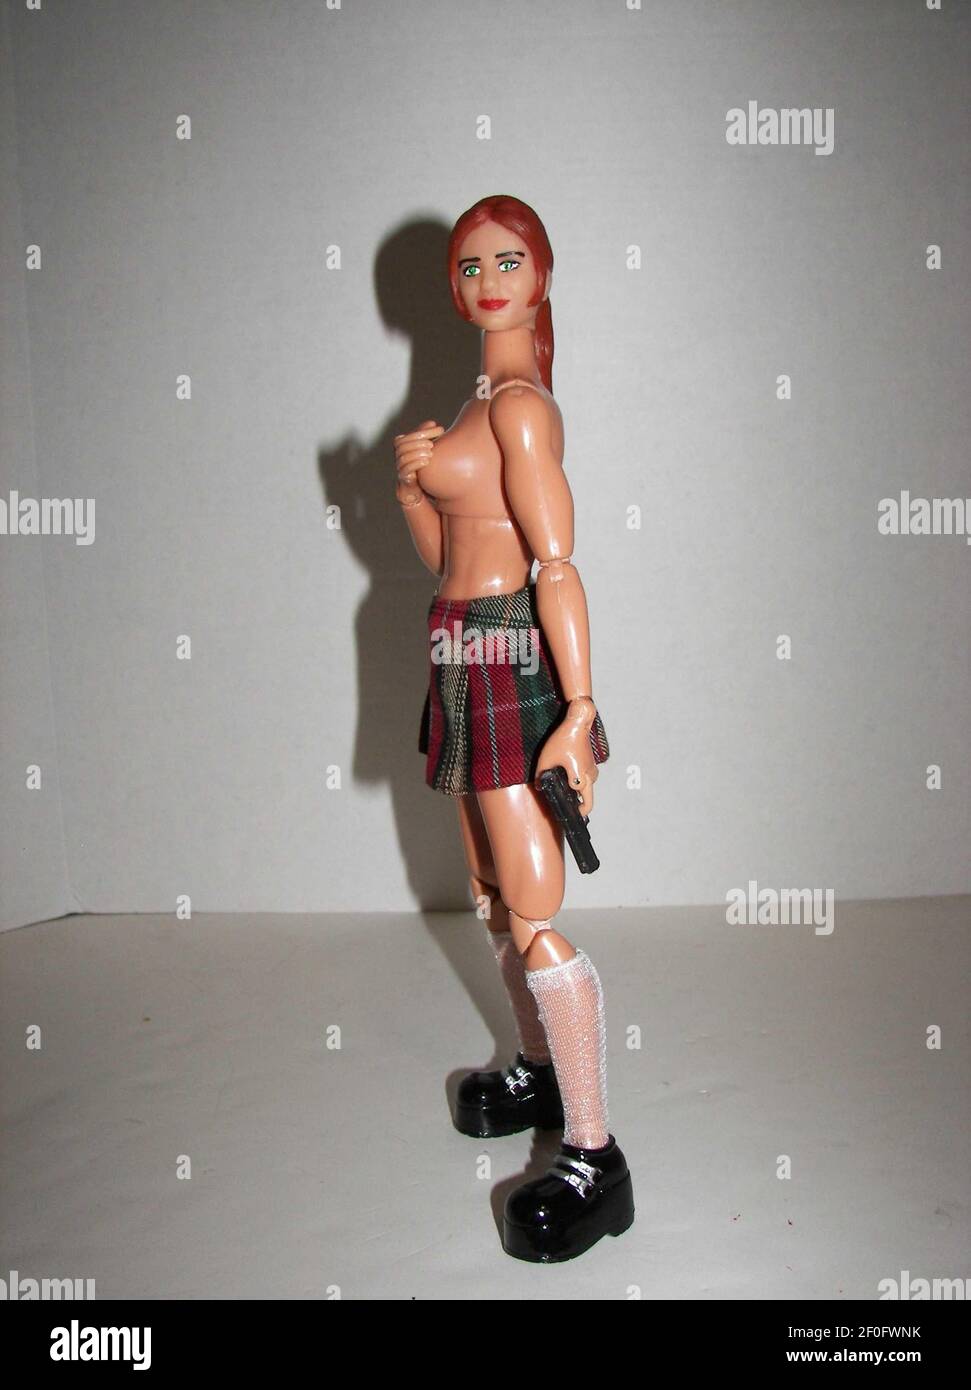 Oxford, CT - Accused Russian Spy Anna Chapman action figure made and sold by Herobuilders.com Herobuilders.com is a company based out of Connecticut that makes political, pop culture and custom action figures. Photo Credit: Herobuilders.com/Sipa Press***FOR EDITORIAL RIGHTS ONLY***/1007262058 Stock Photo